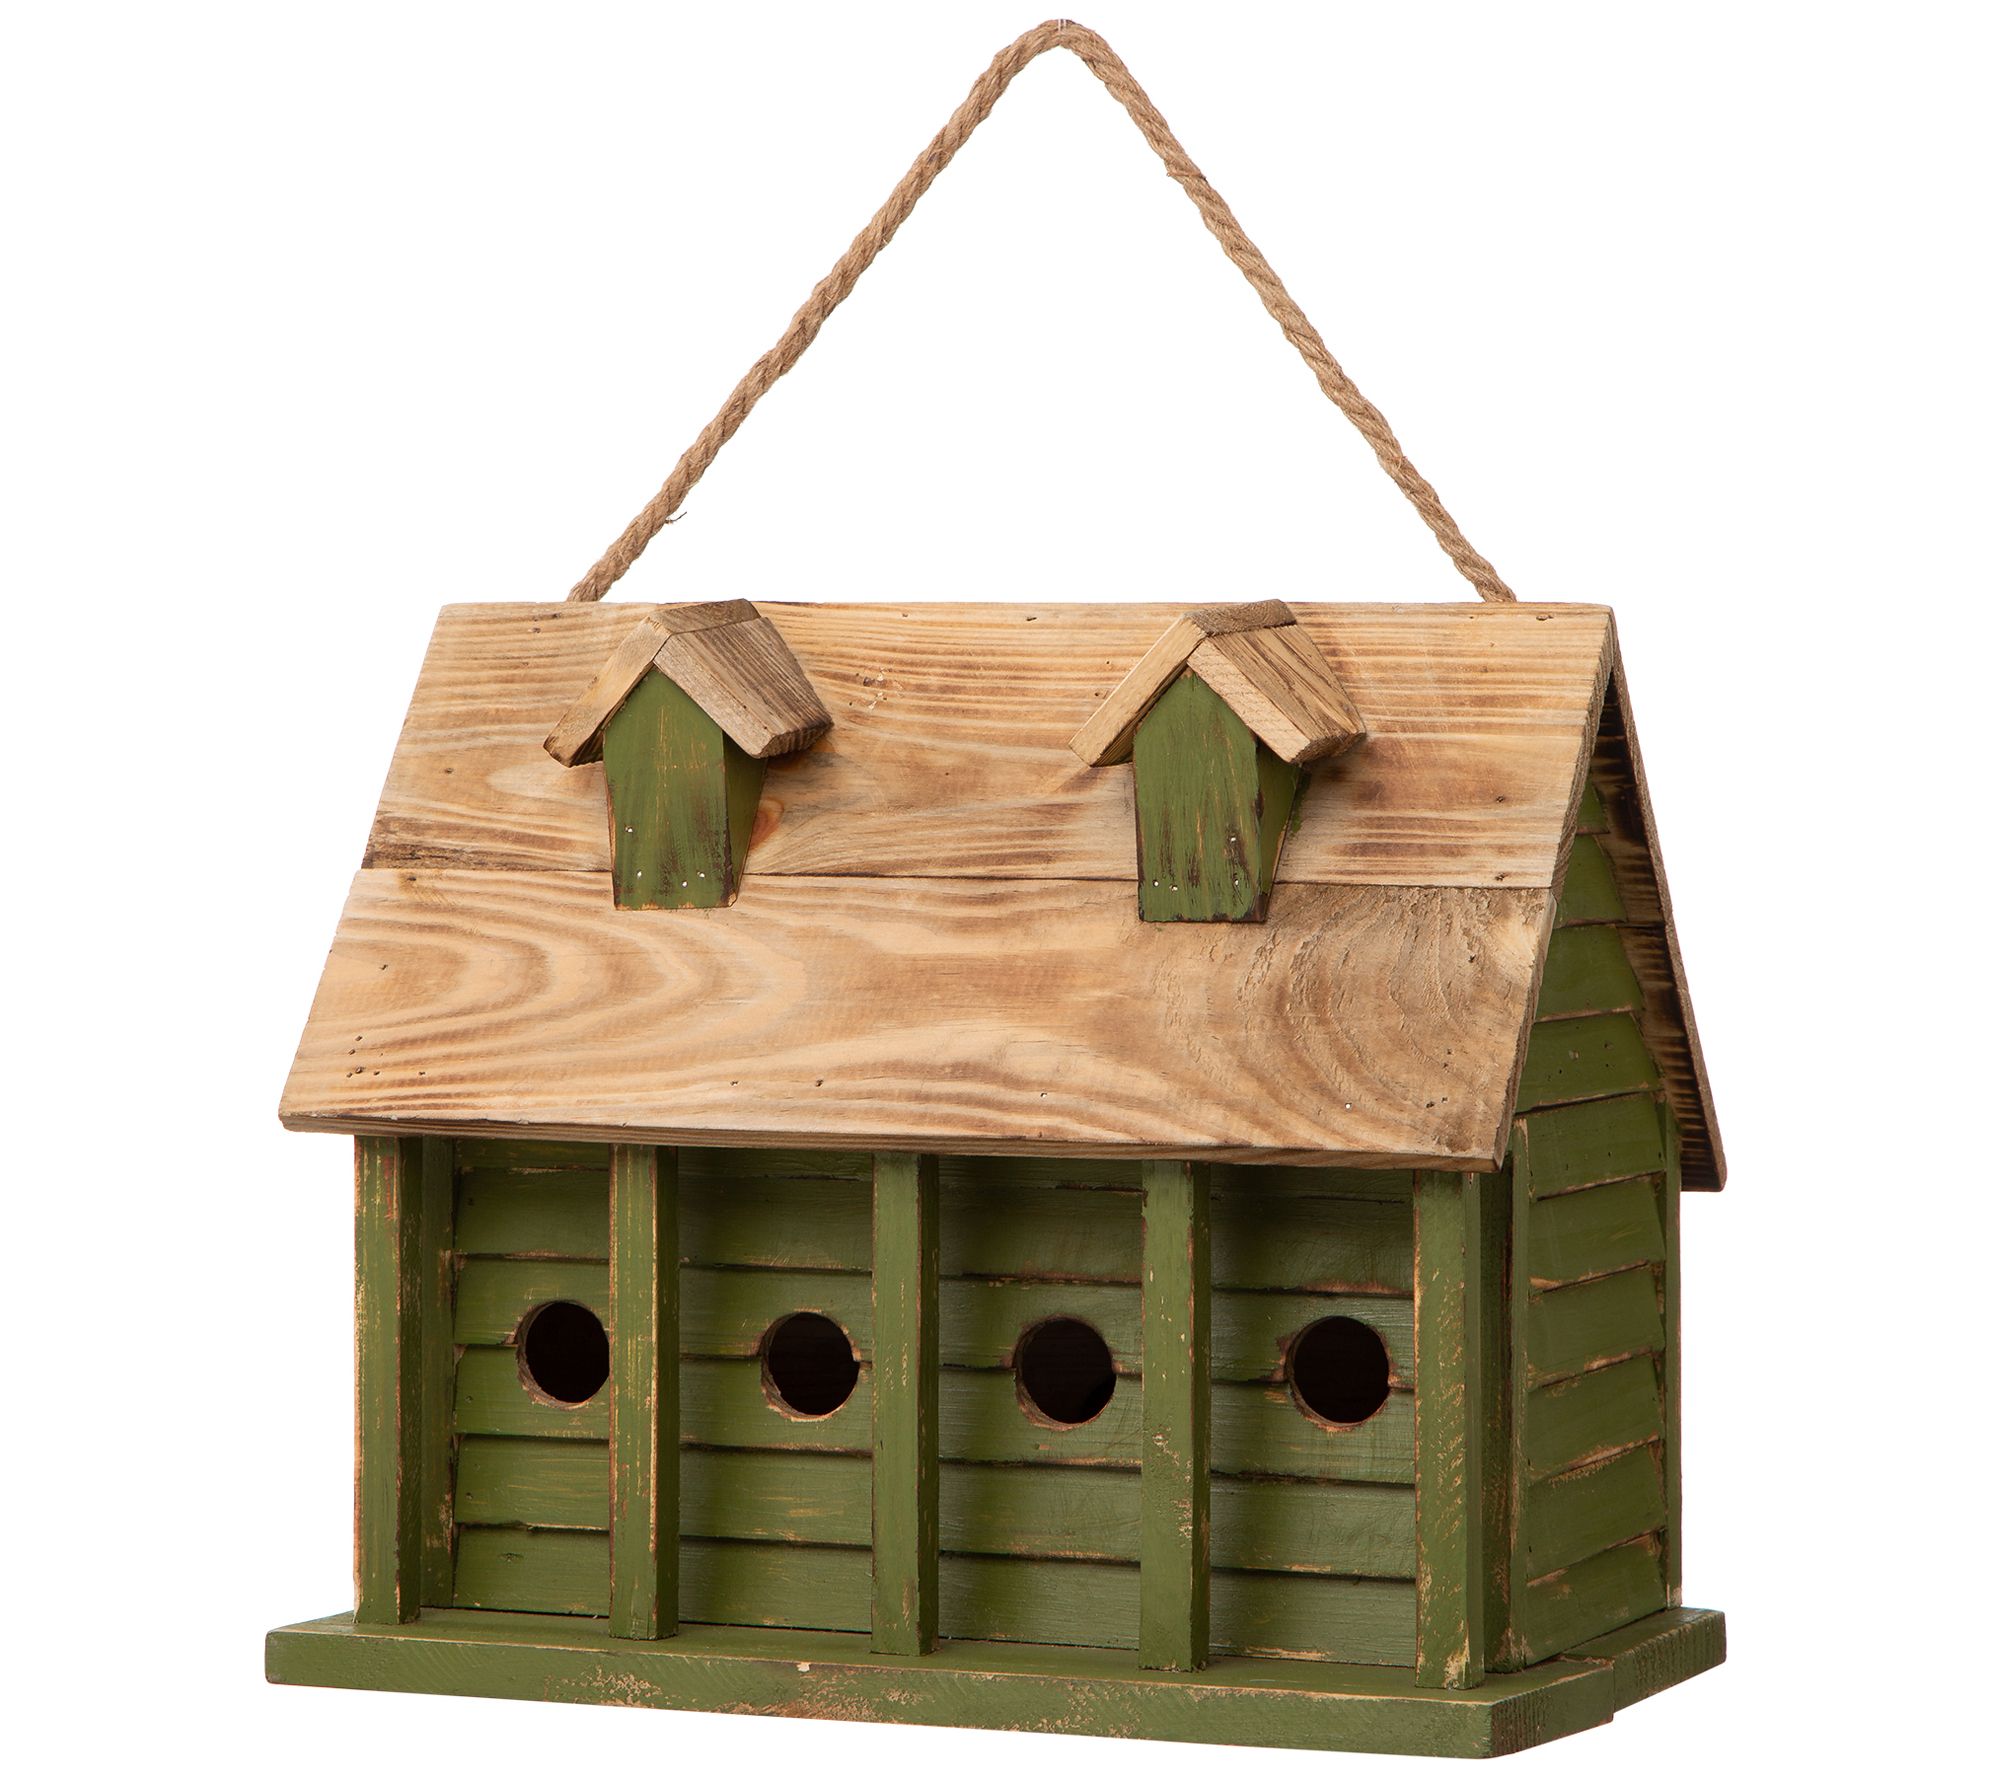 Glitzhome Rustic Tall Church Wooden Hanging Birdhouse Garden Bird Nesting Cage for sale online 